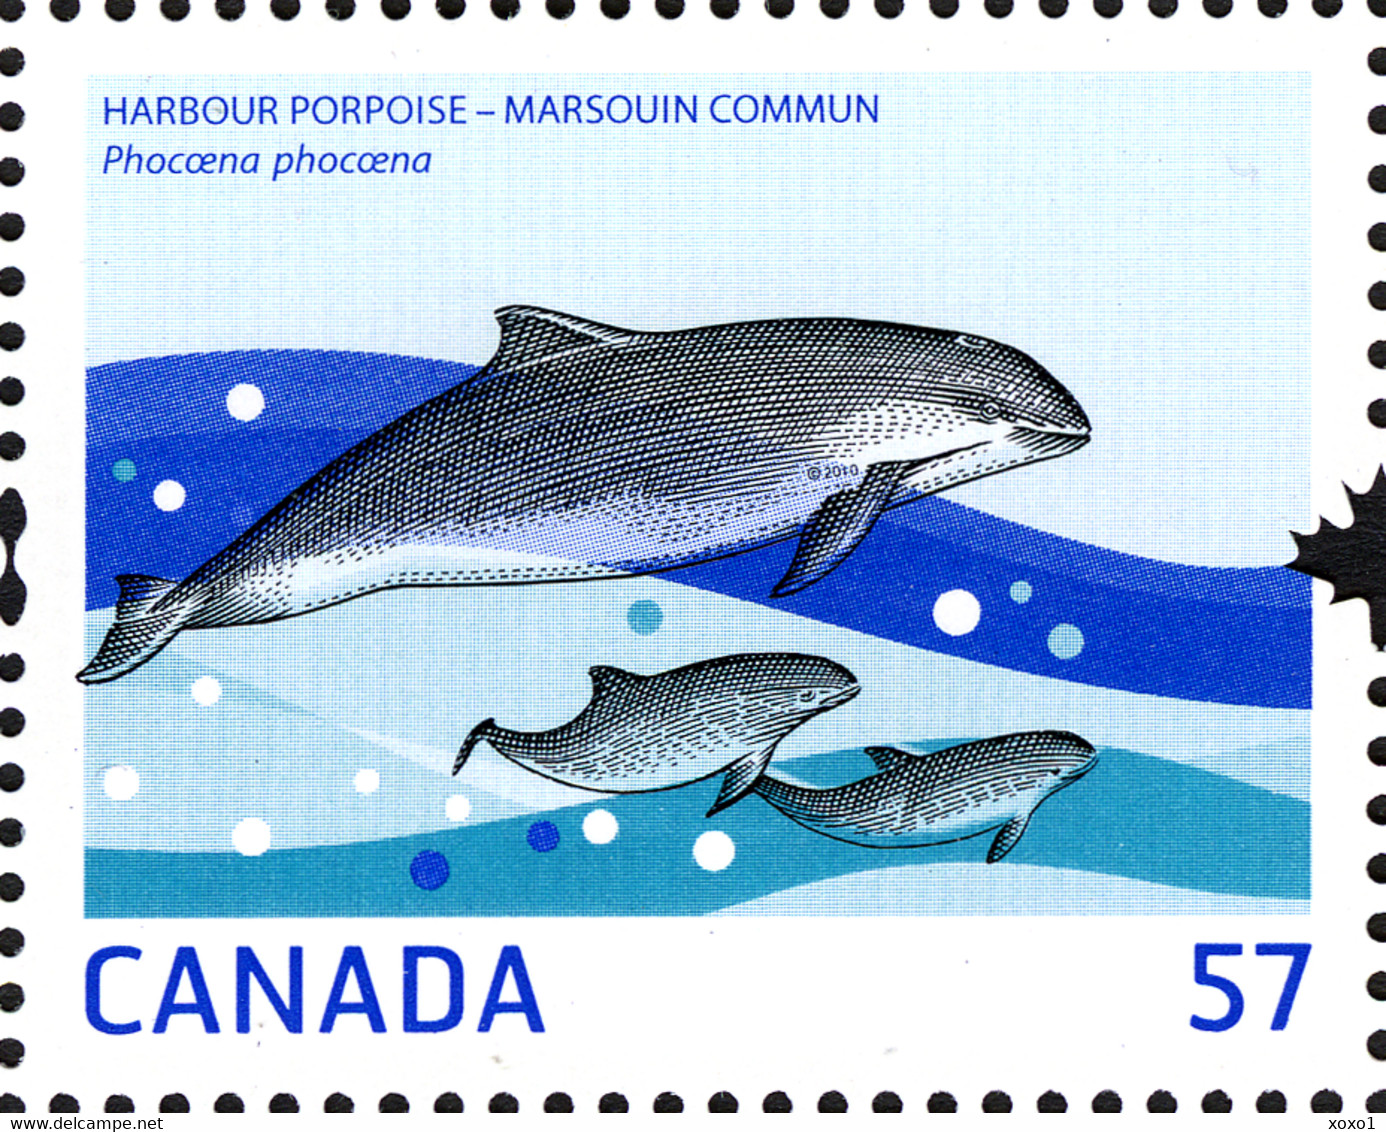 Canada 2010 MiNr. 2636 - 2637 (Block 128) MARINE MAMMALS DOLPHINS Joint Issue Sweden 2v+1bl MNH** 4.90 € - Dolphins